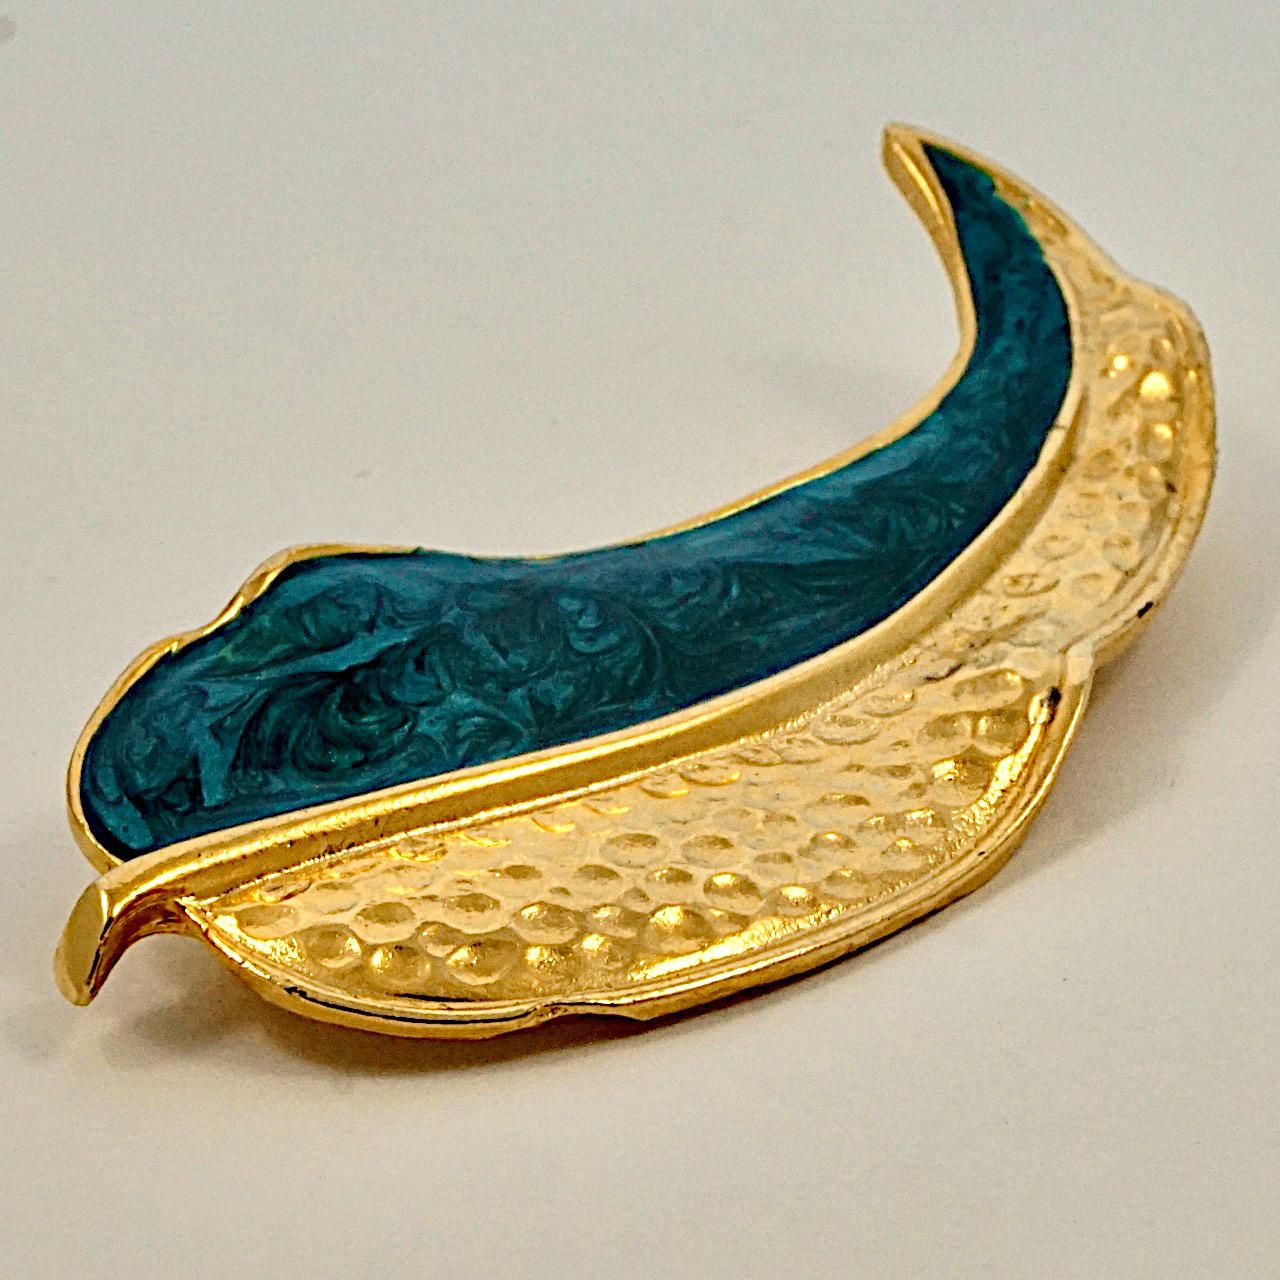 Stylish gold plated leaf brooch with teal enamel. This is a large brooch measuring length 8.4 cm / 3.3 inches by width 3.65 cm / 1.4 inches. The brooch is in very good condition.

This lovely statement leaf brooch is circa 1980s.